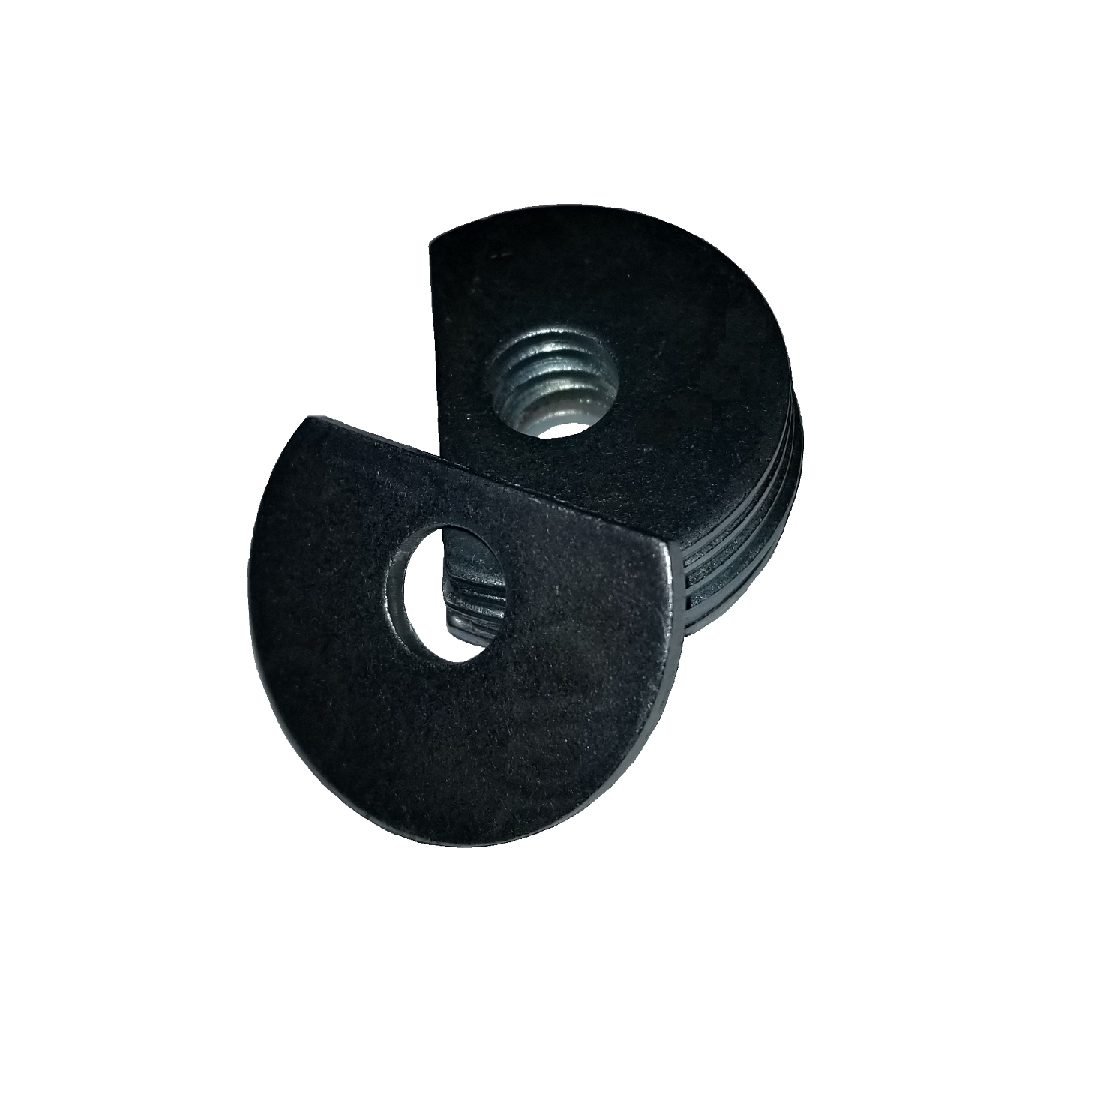 Clipped OD Washer - 2.156 ID, 3.750 OD, 0.187 Thick, Spring Steel - Hard, Black Oxide